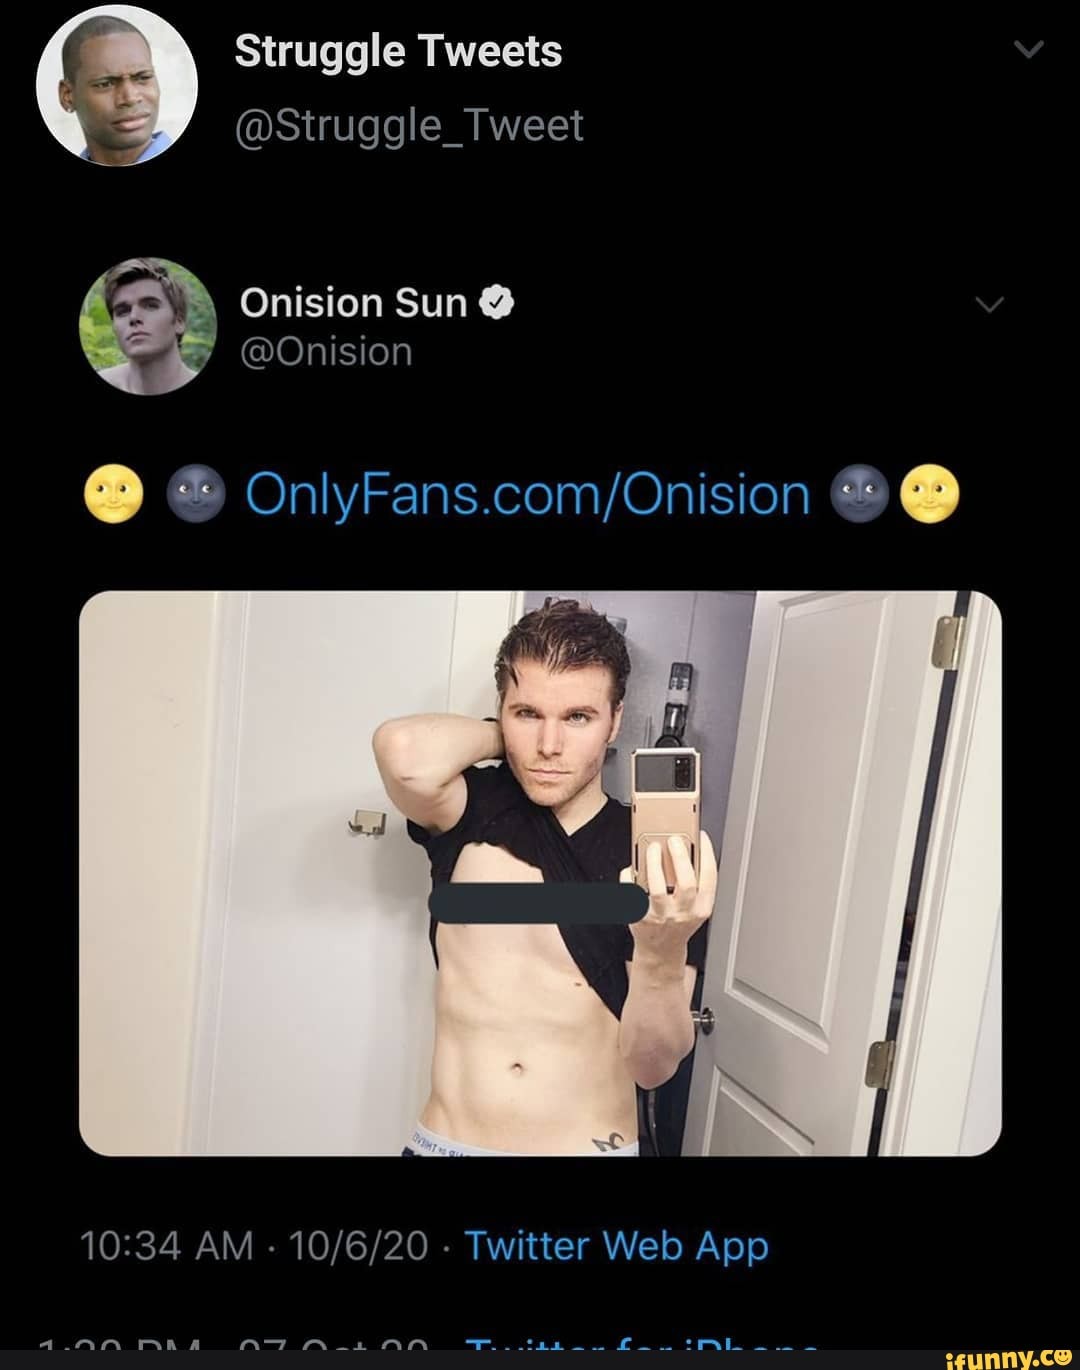 Onisions only fans